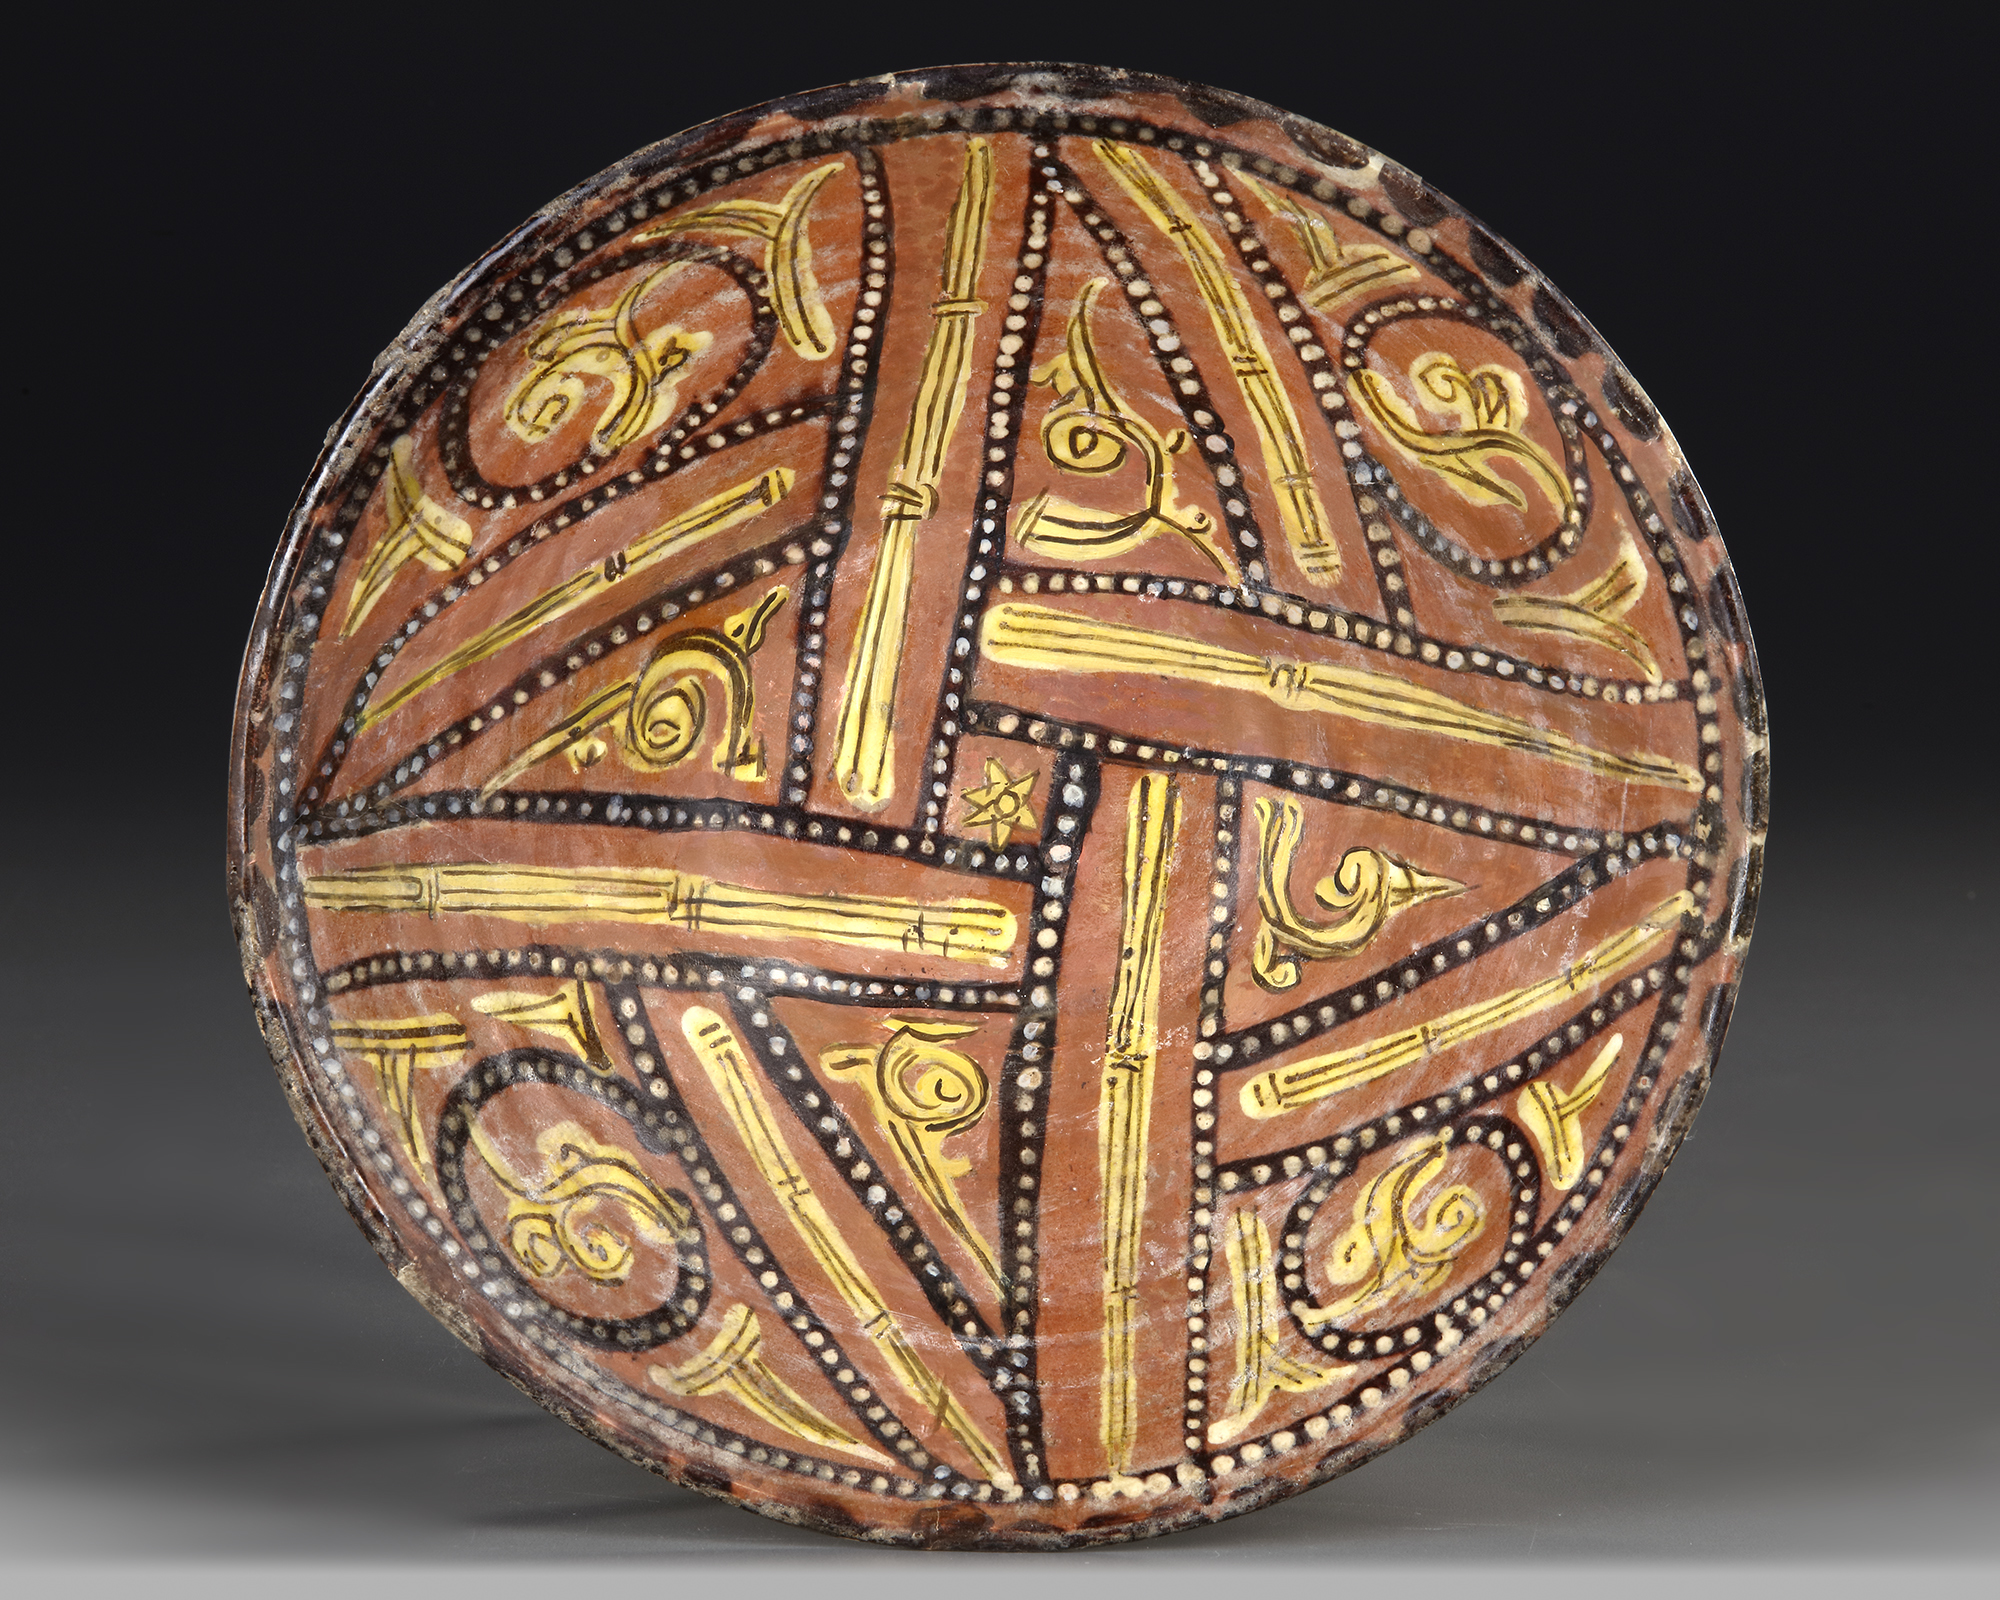 A NISHAPUR CONICAL POTTERY BOWL, PERSIA, 10TH CENTURY - Image 2 of 10